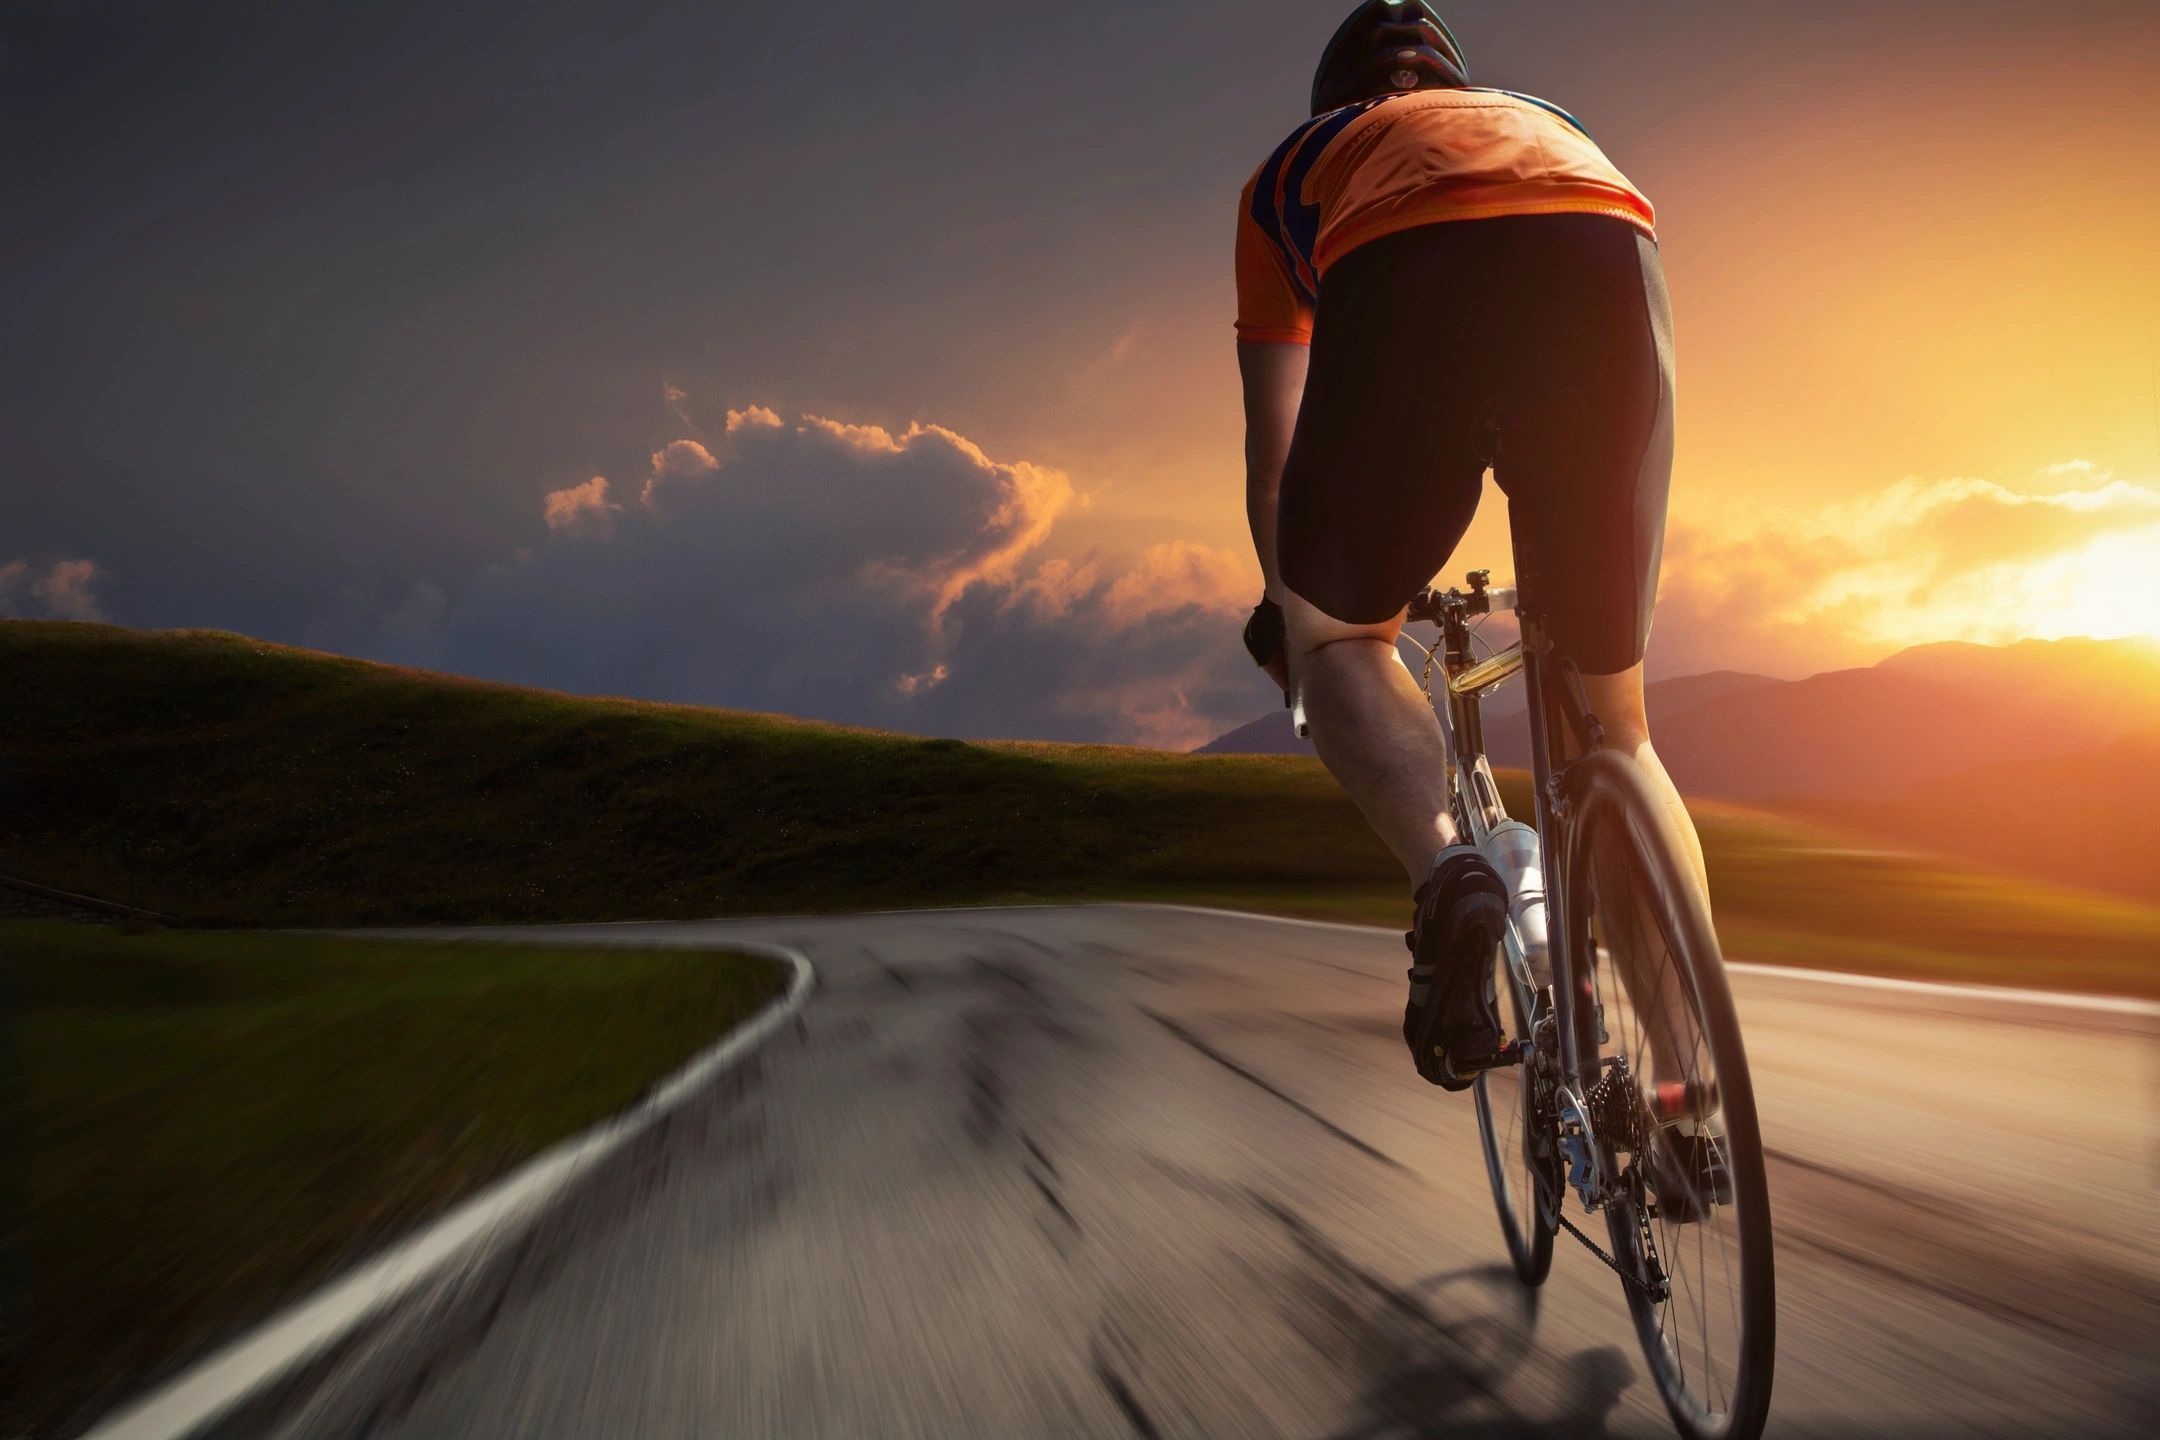 A cyclist on an open road with a colourful sunset in the background